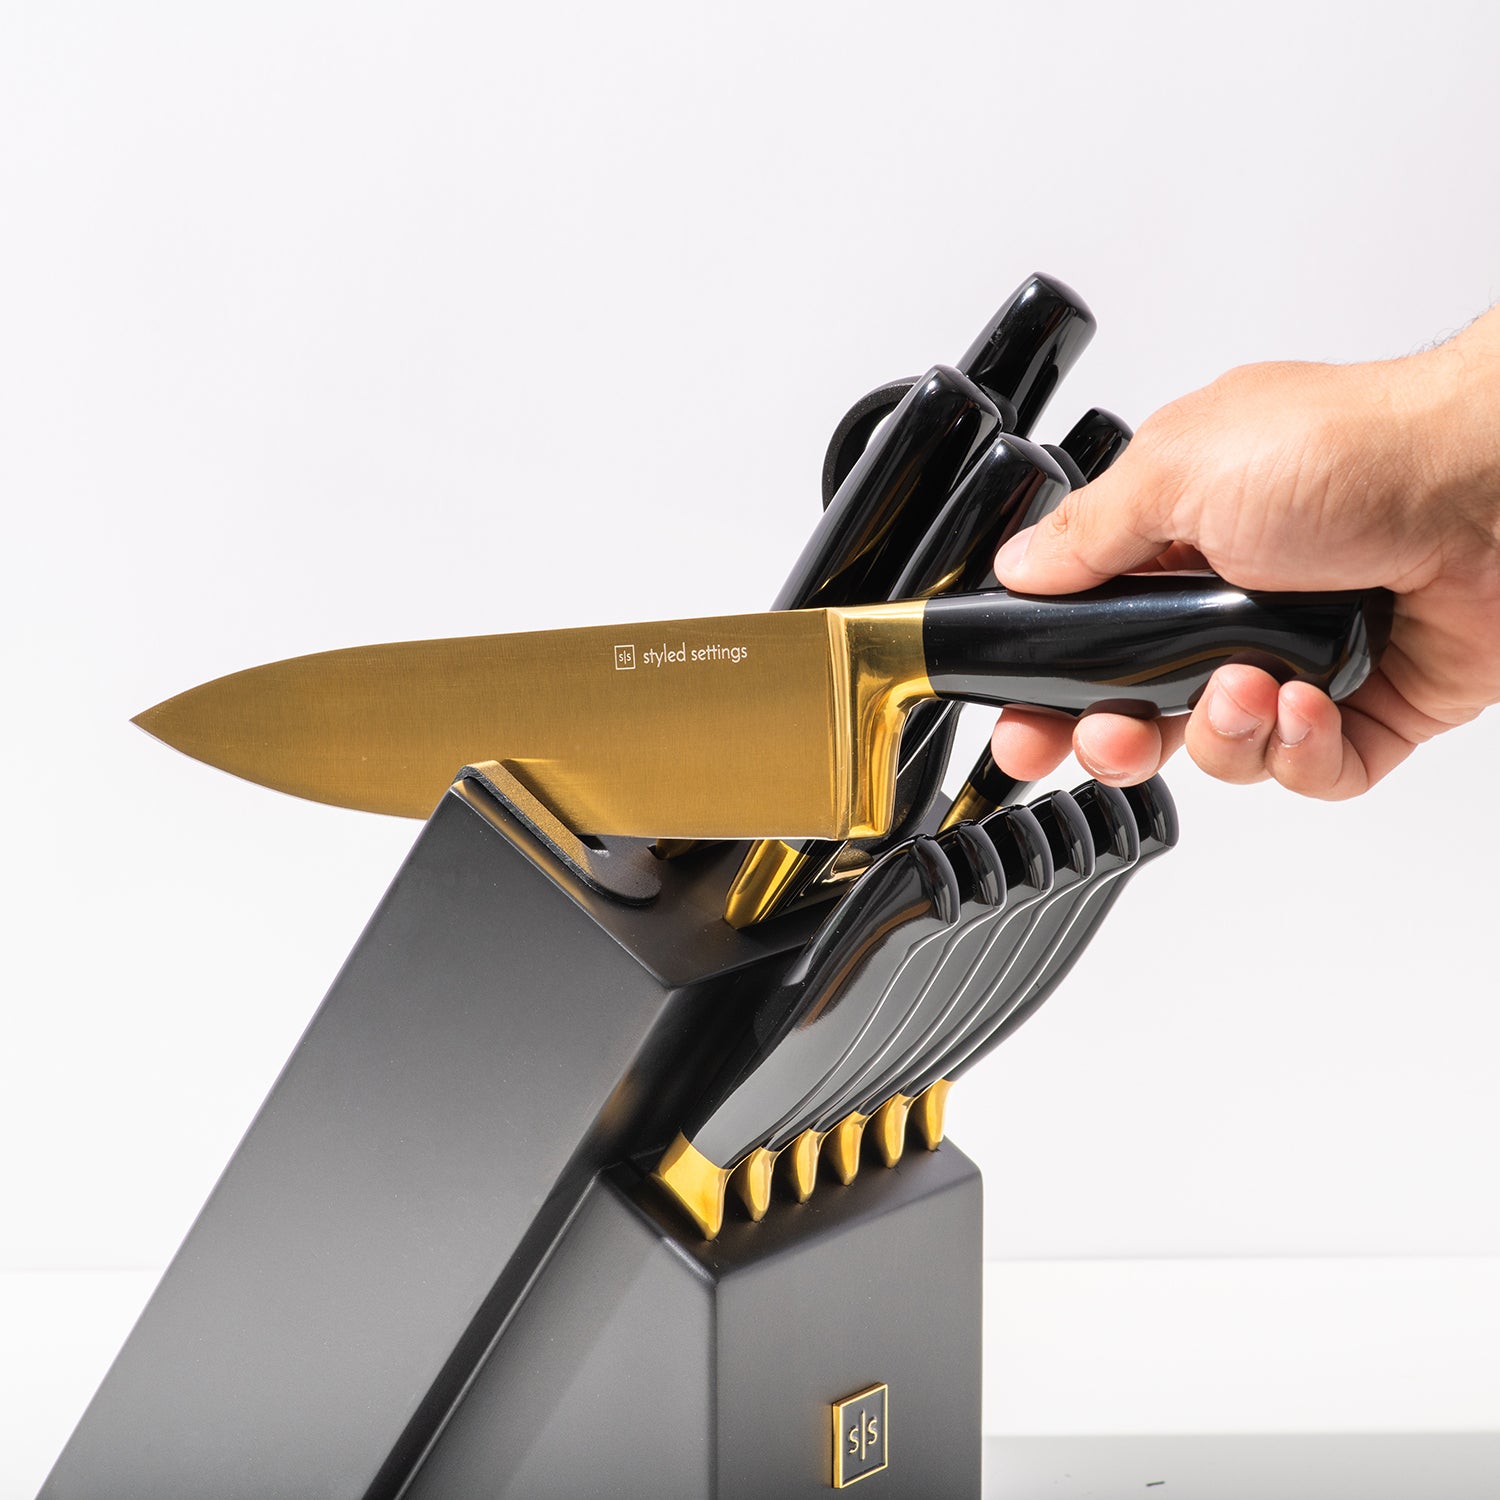 Black and Gold Knife Set with Black Self-Sharpening Block - Styled Settings